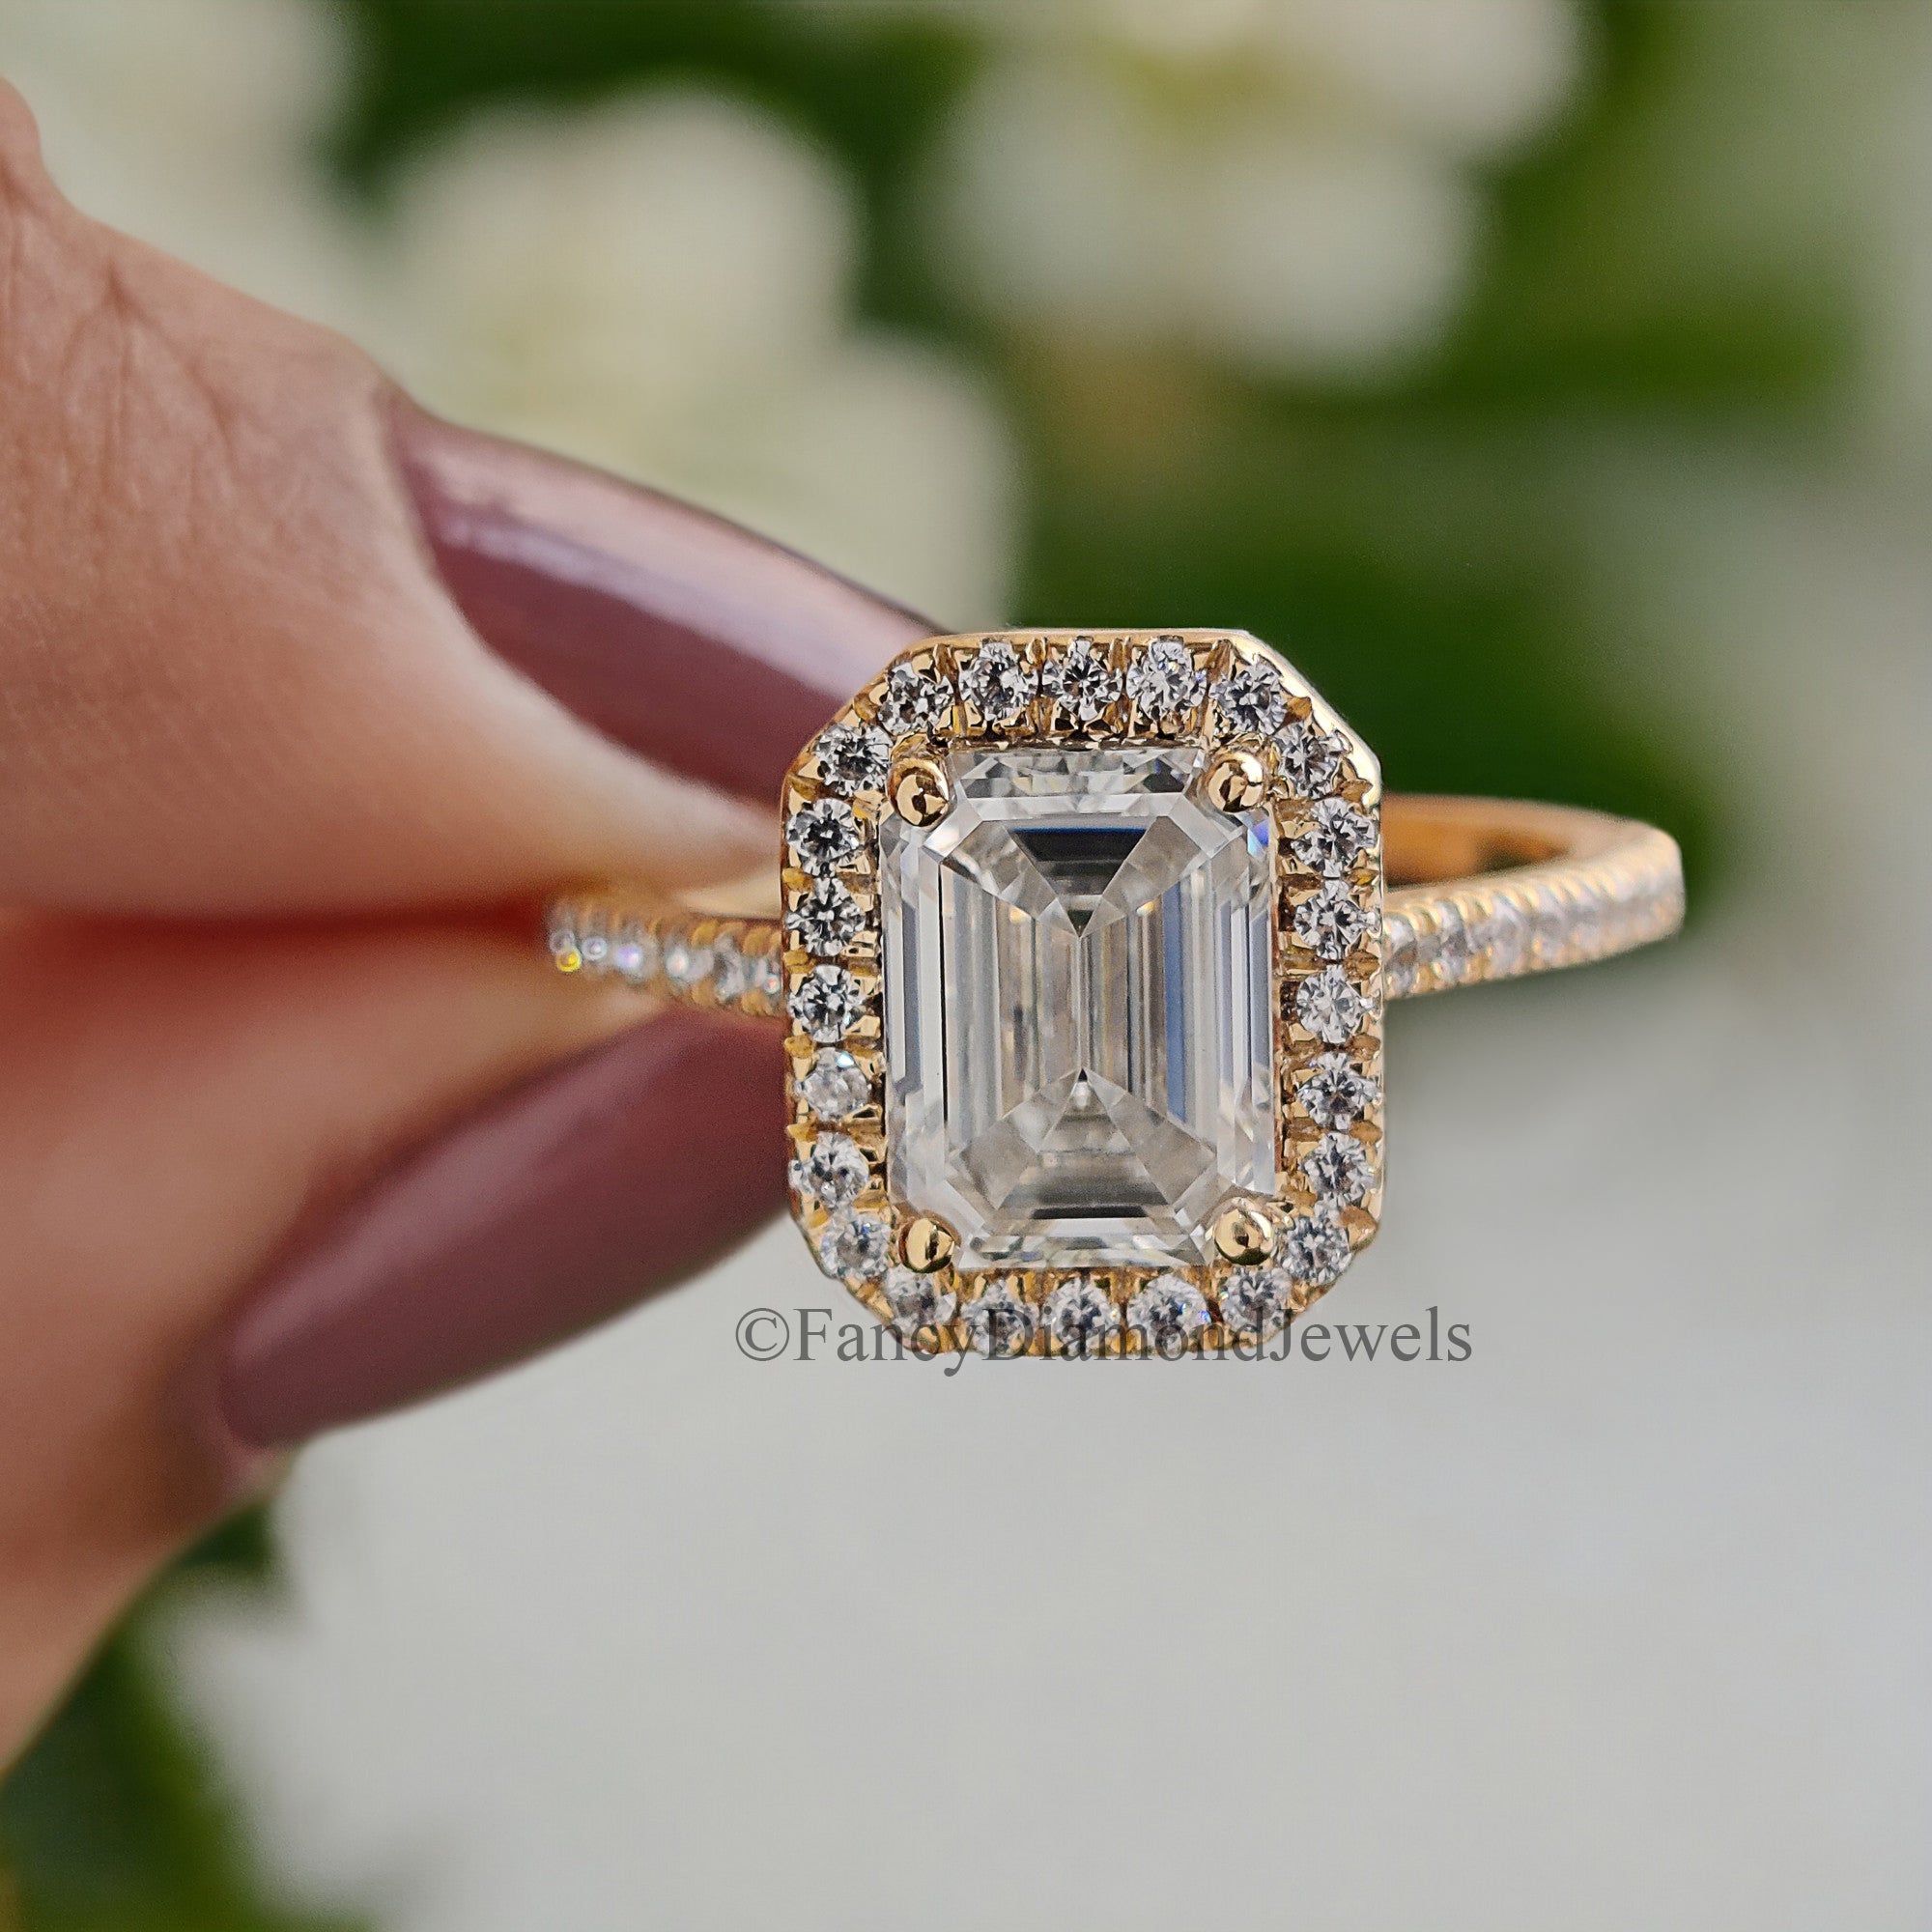 1.5 CT Emerald Cut Moissanite Solitaire Ring 14K Yellow Gold Engagement Ring Halo Setting Statement Ring Gift For Her Anniversary Ring FD89